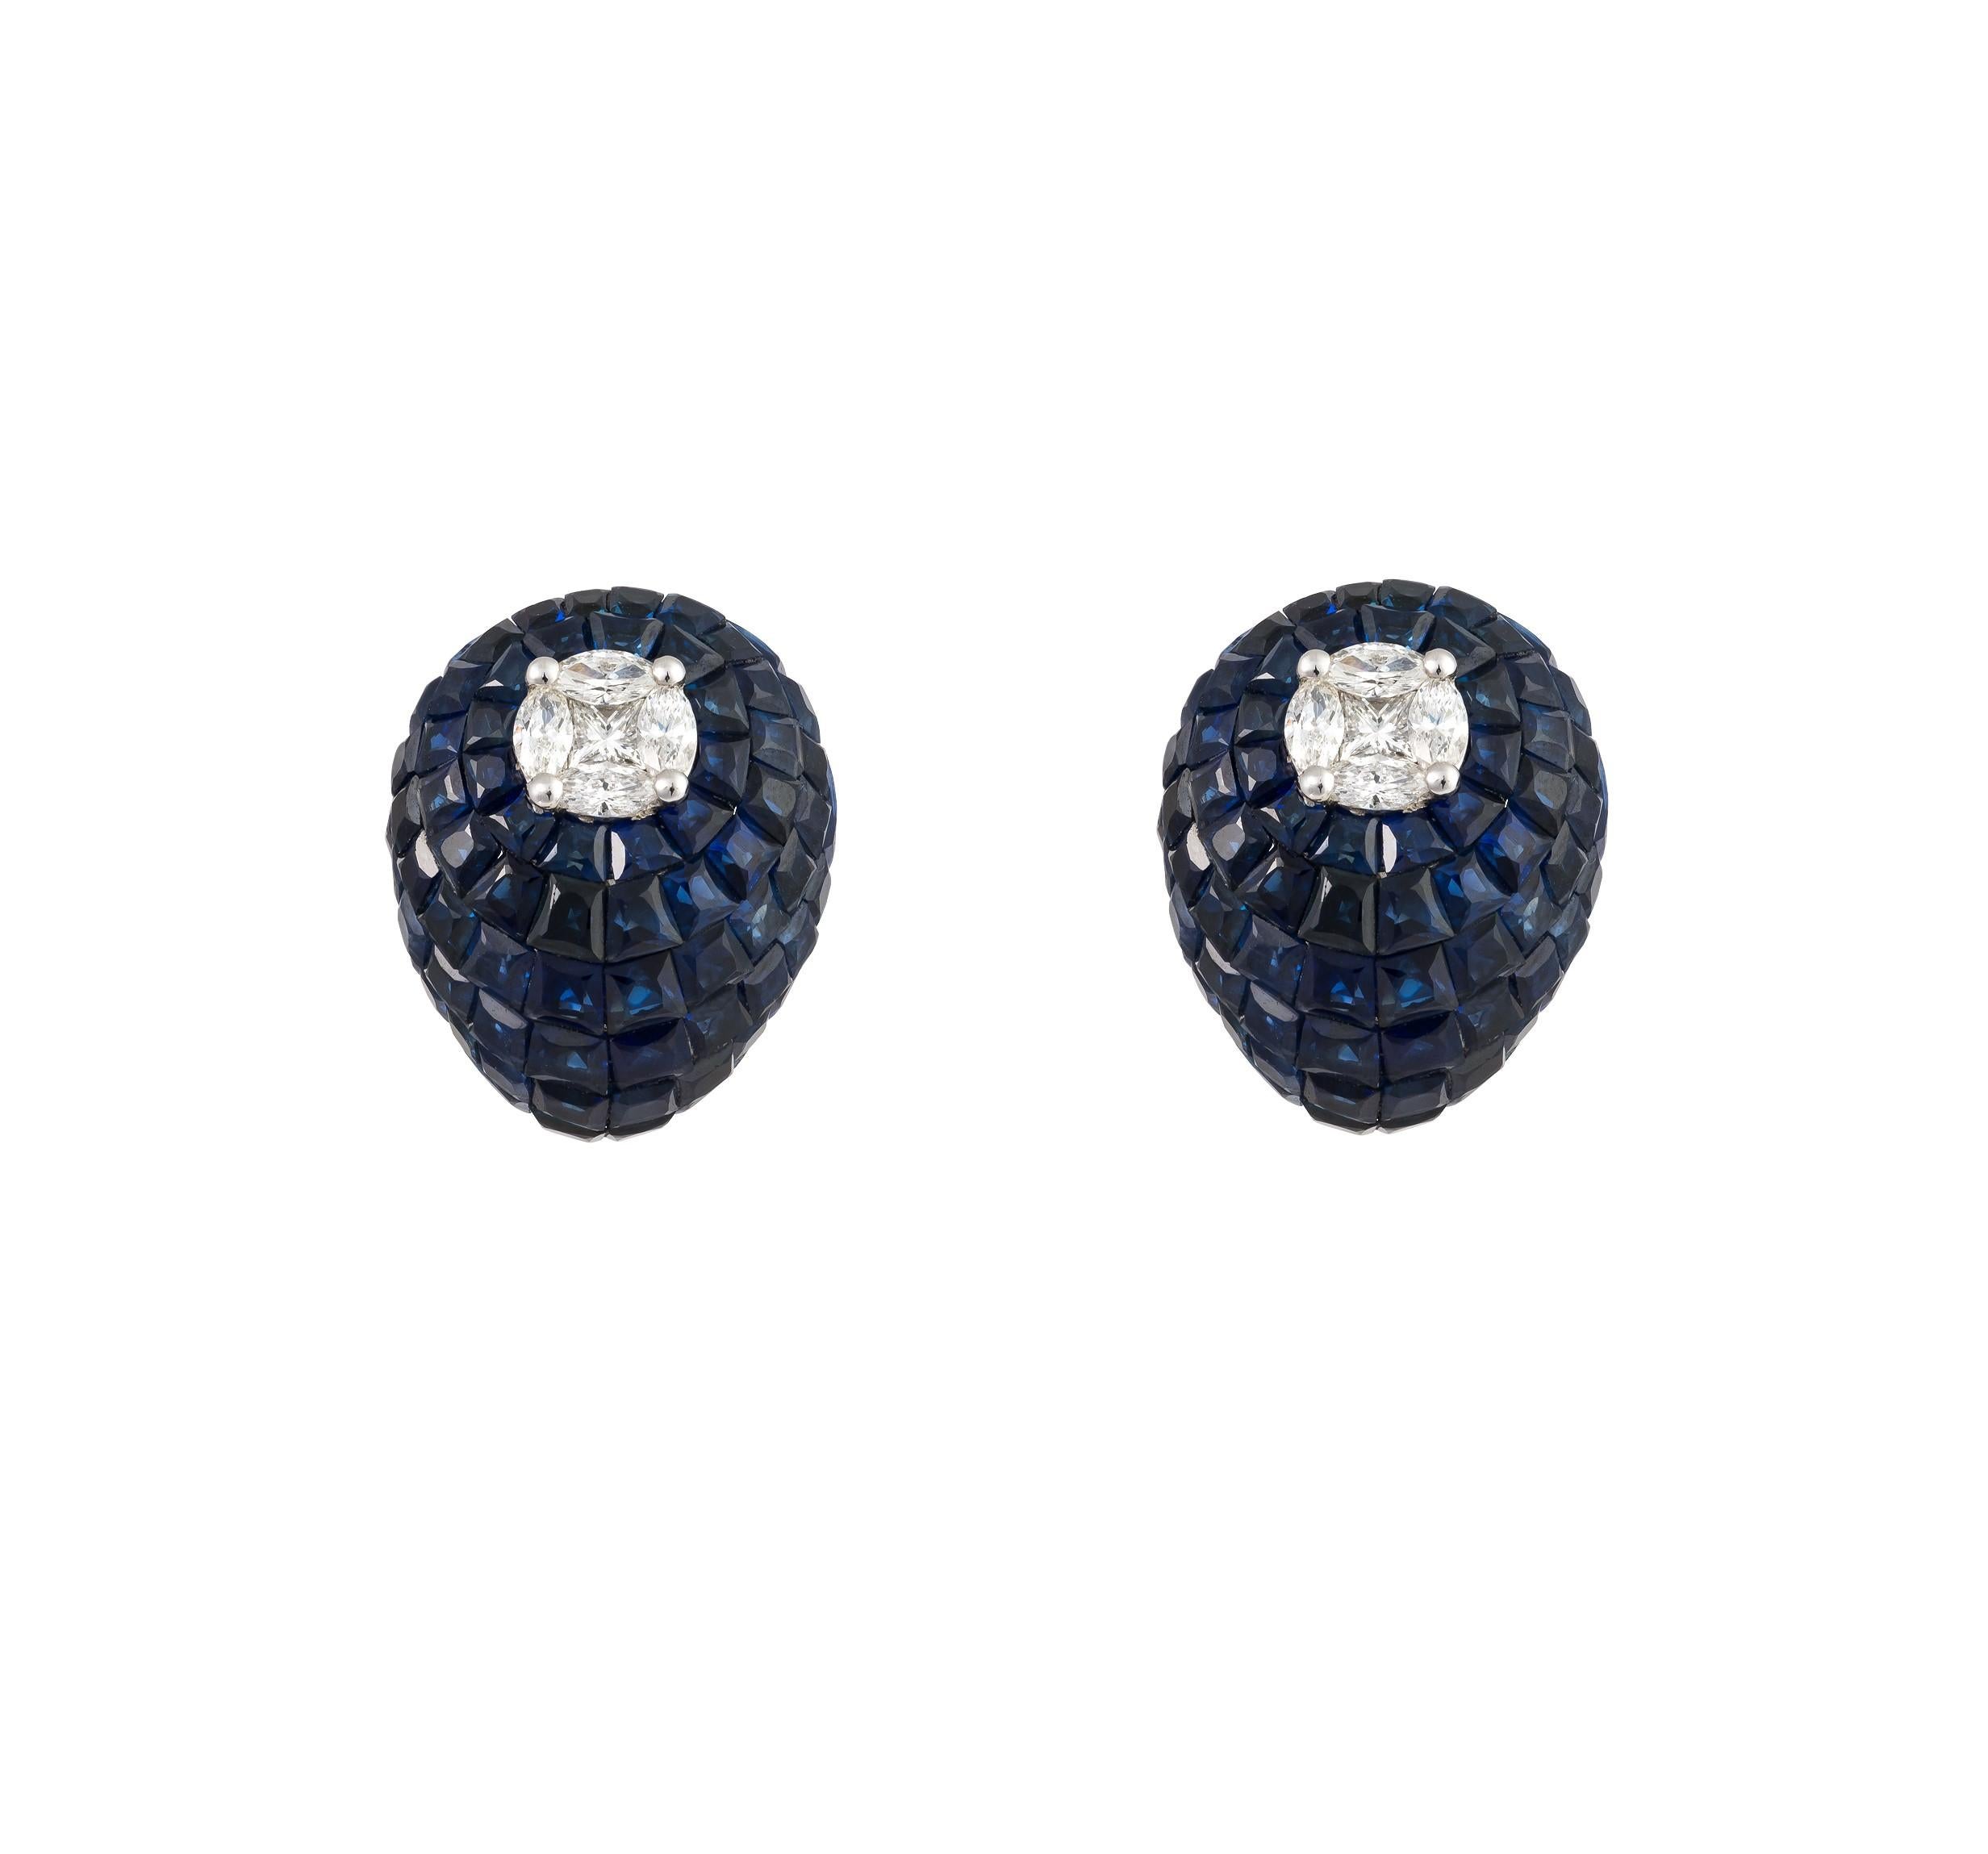 
The Following Items we are offering is a Rare Important Radiant 18KT Gold Gorgeous Glittering Blue Sapphire and Diamond Bombe Earrings. Earrings Feature Gorgeous Colorful Blue Sapphires adorned with Spectacular Glittering Round Diamonds all set in